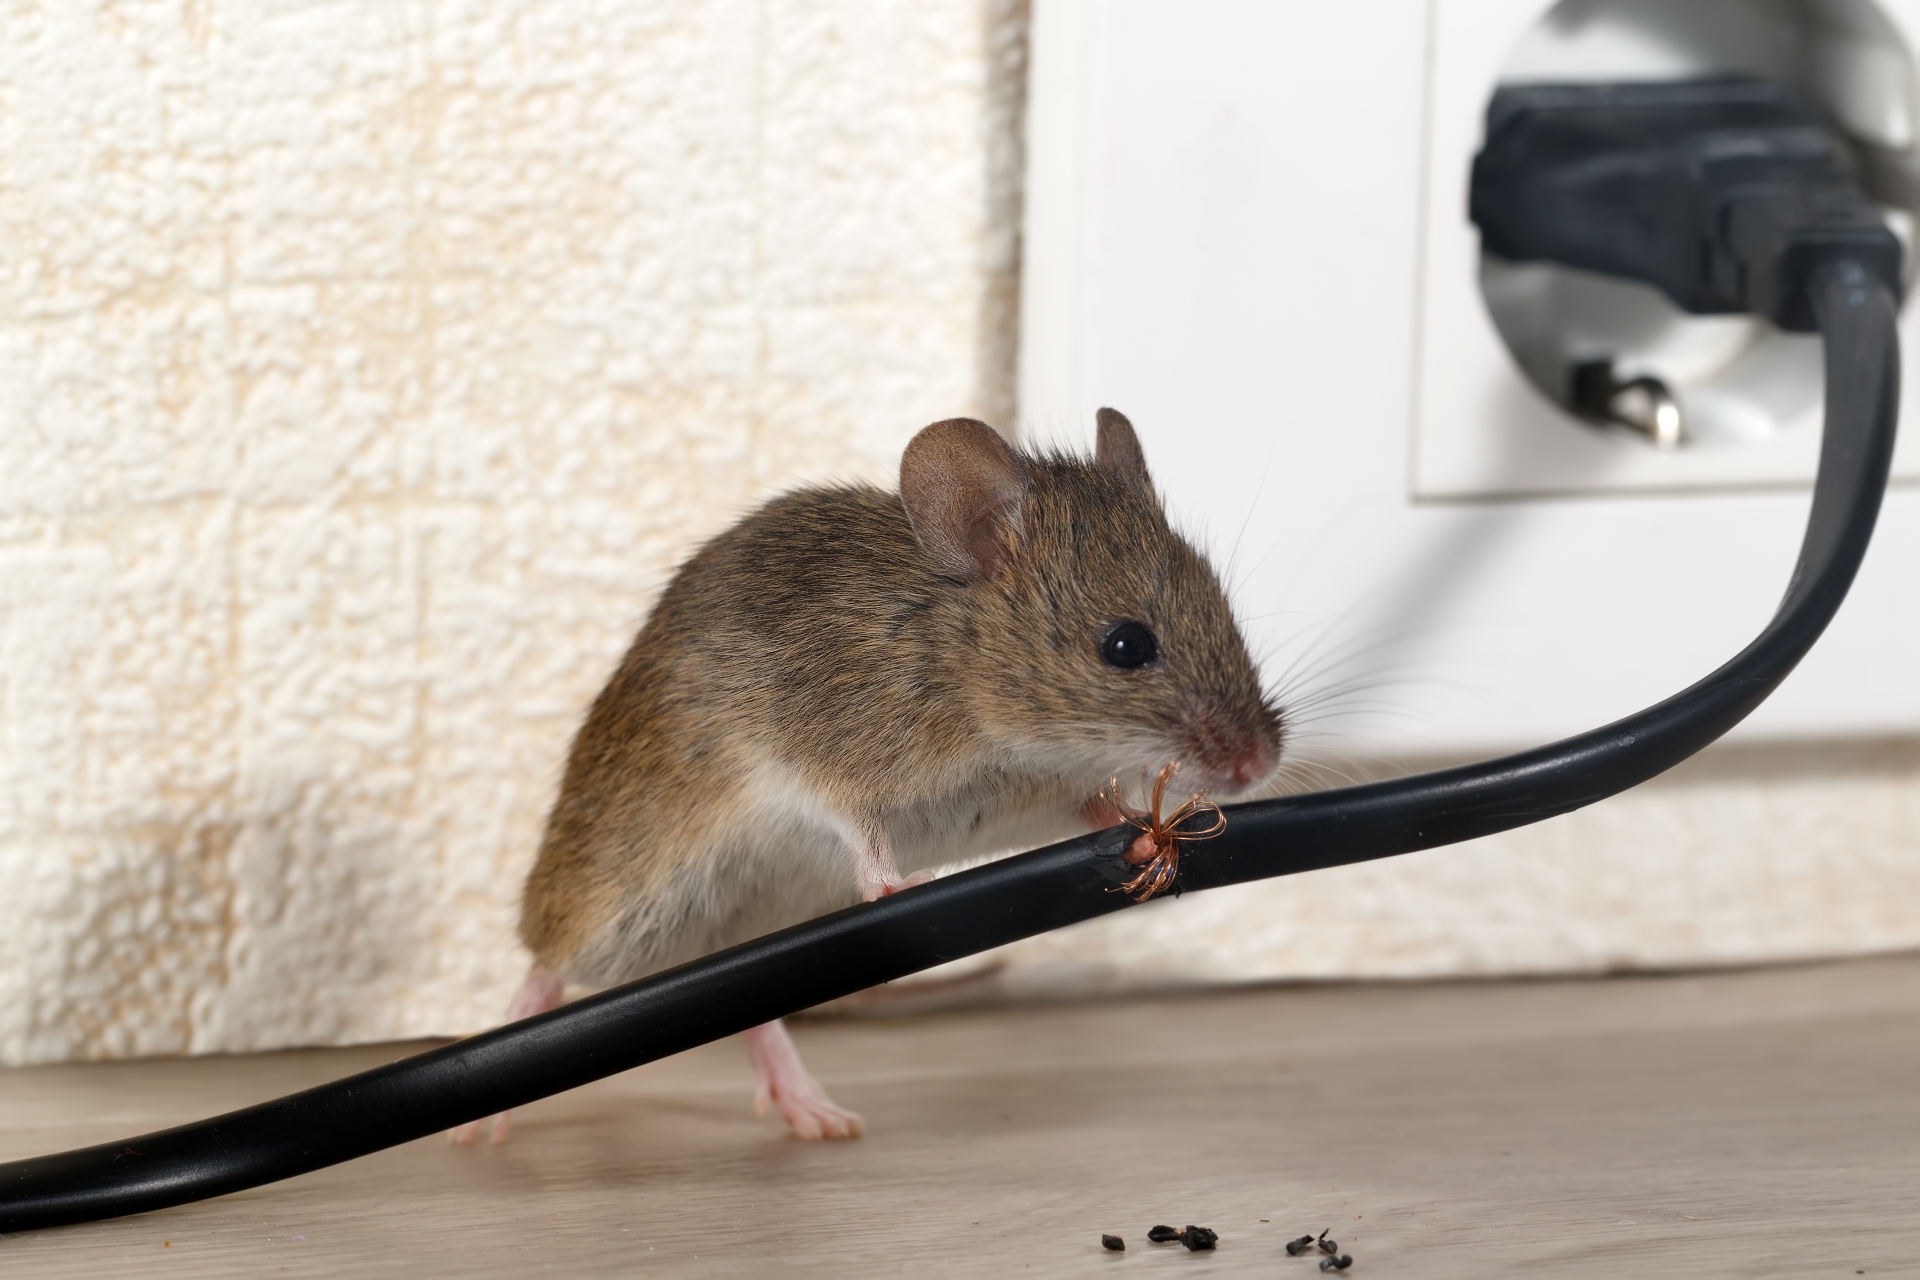 Mice Infestation, Pest Control in Walthamstow, E17. Call Now 020 8166 9746